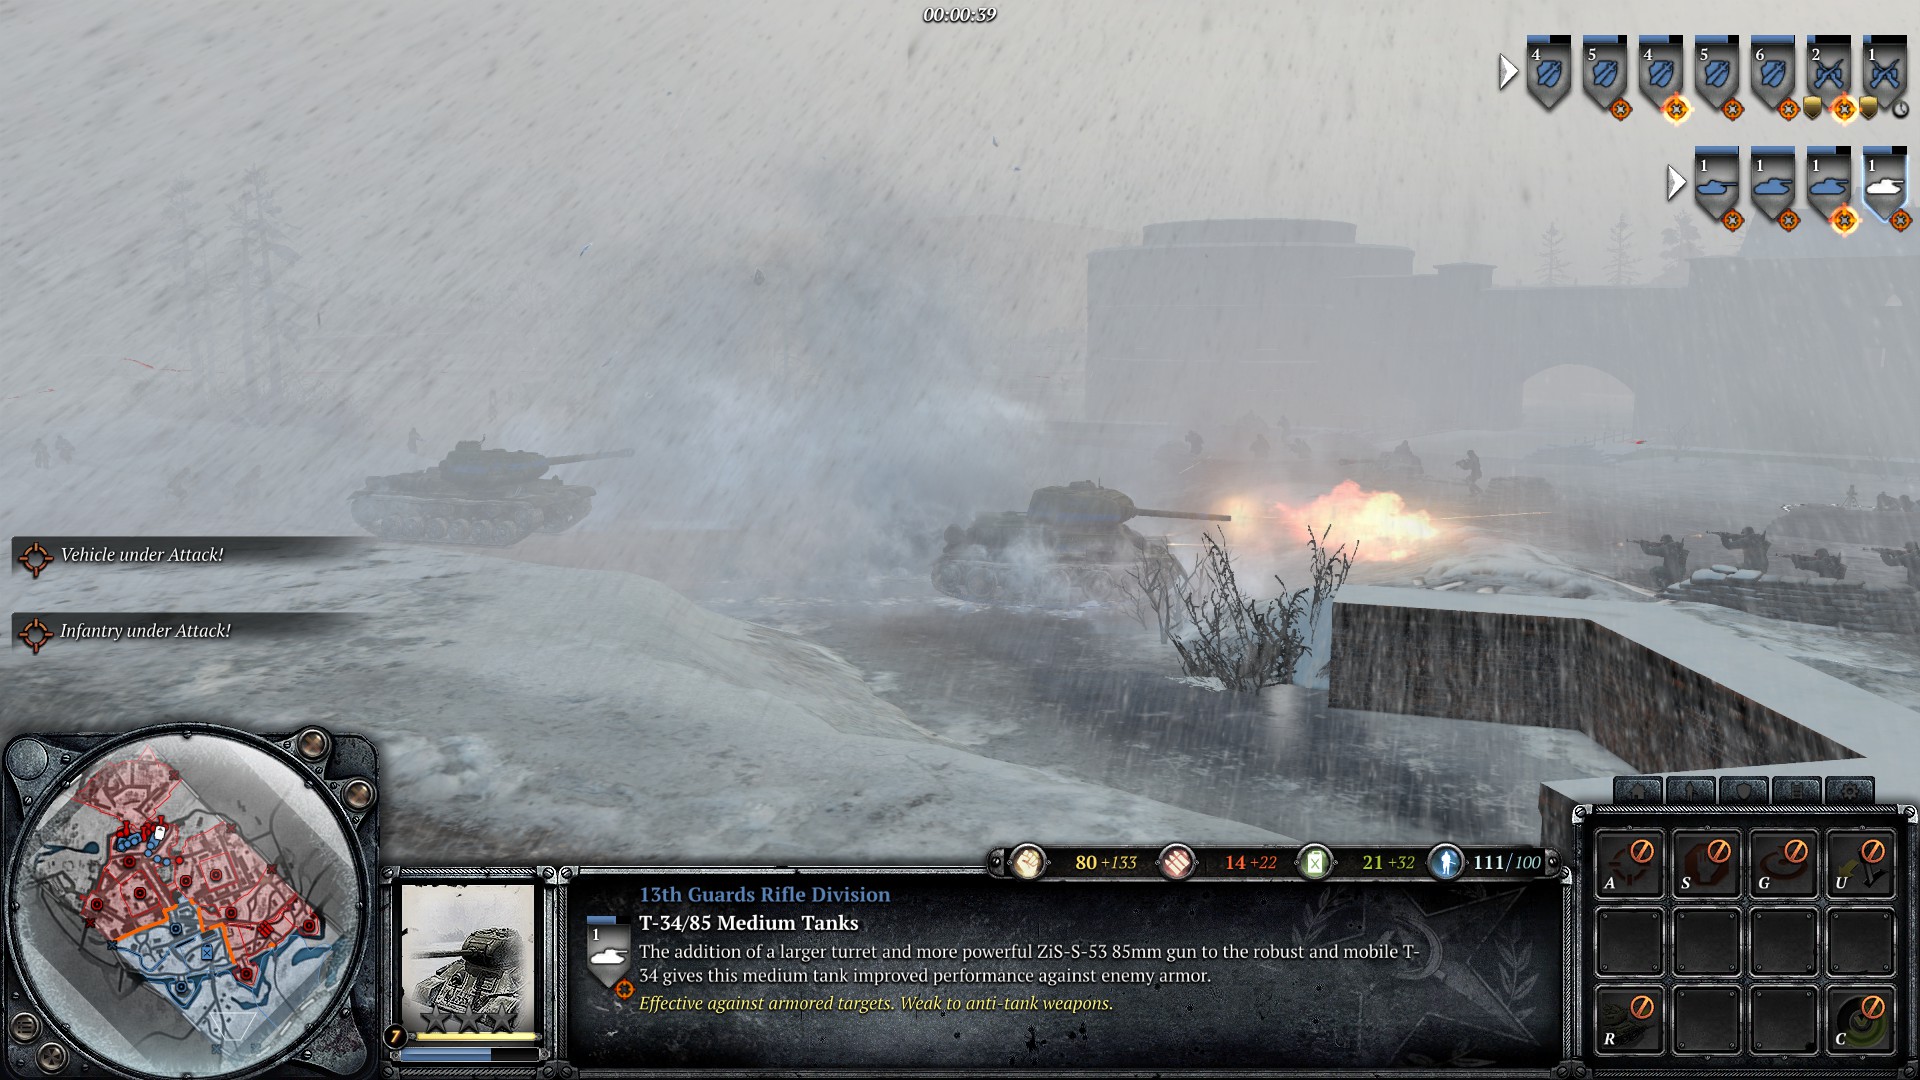 Intel Xeon E5 2697 V2 And Xeon E5 2687w V2 Review - Similar Game Like Company Of Heroes , HD Wallpaper & Backgrounds